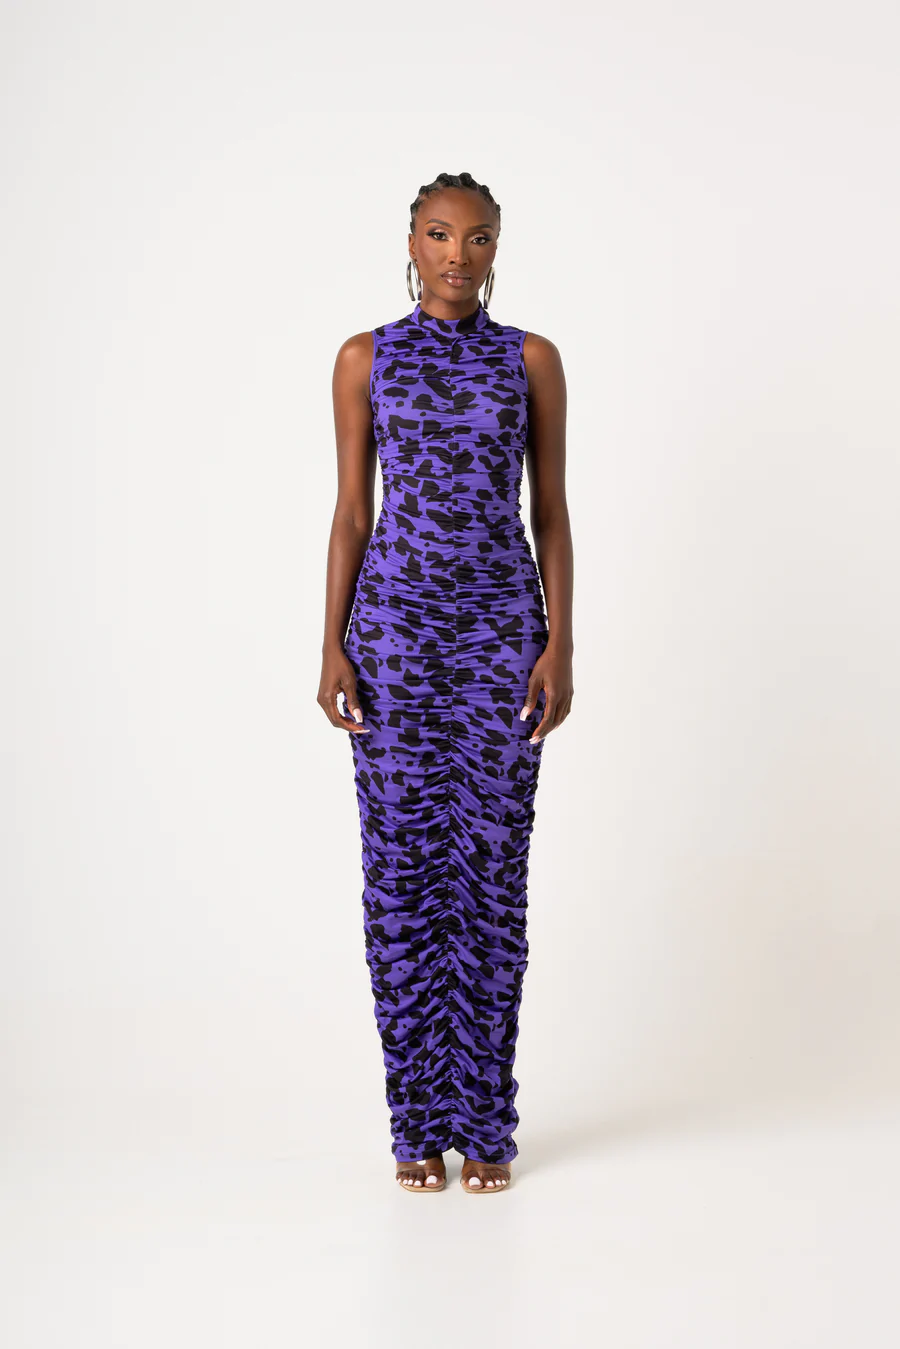 Best African Fashion Styles_Farrah Ruched Dress